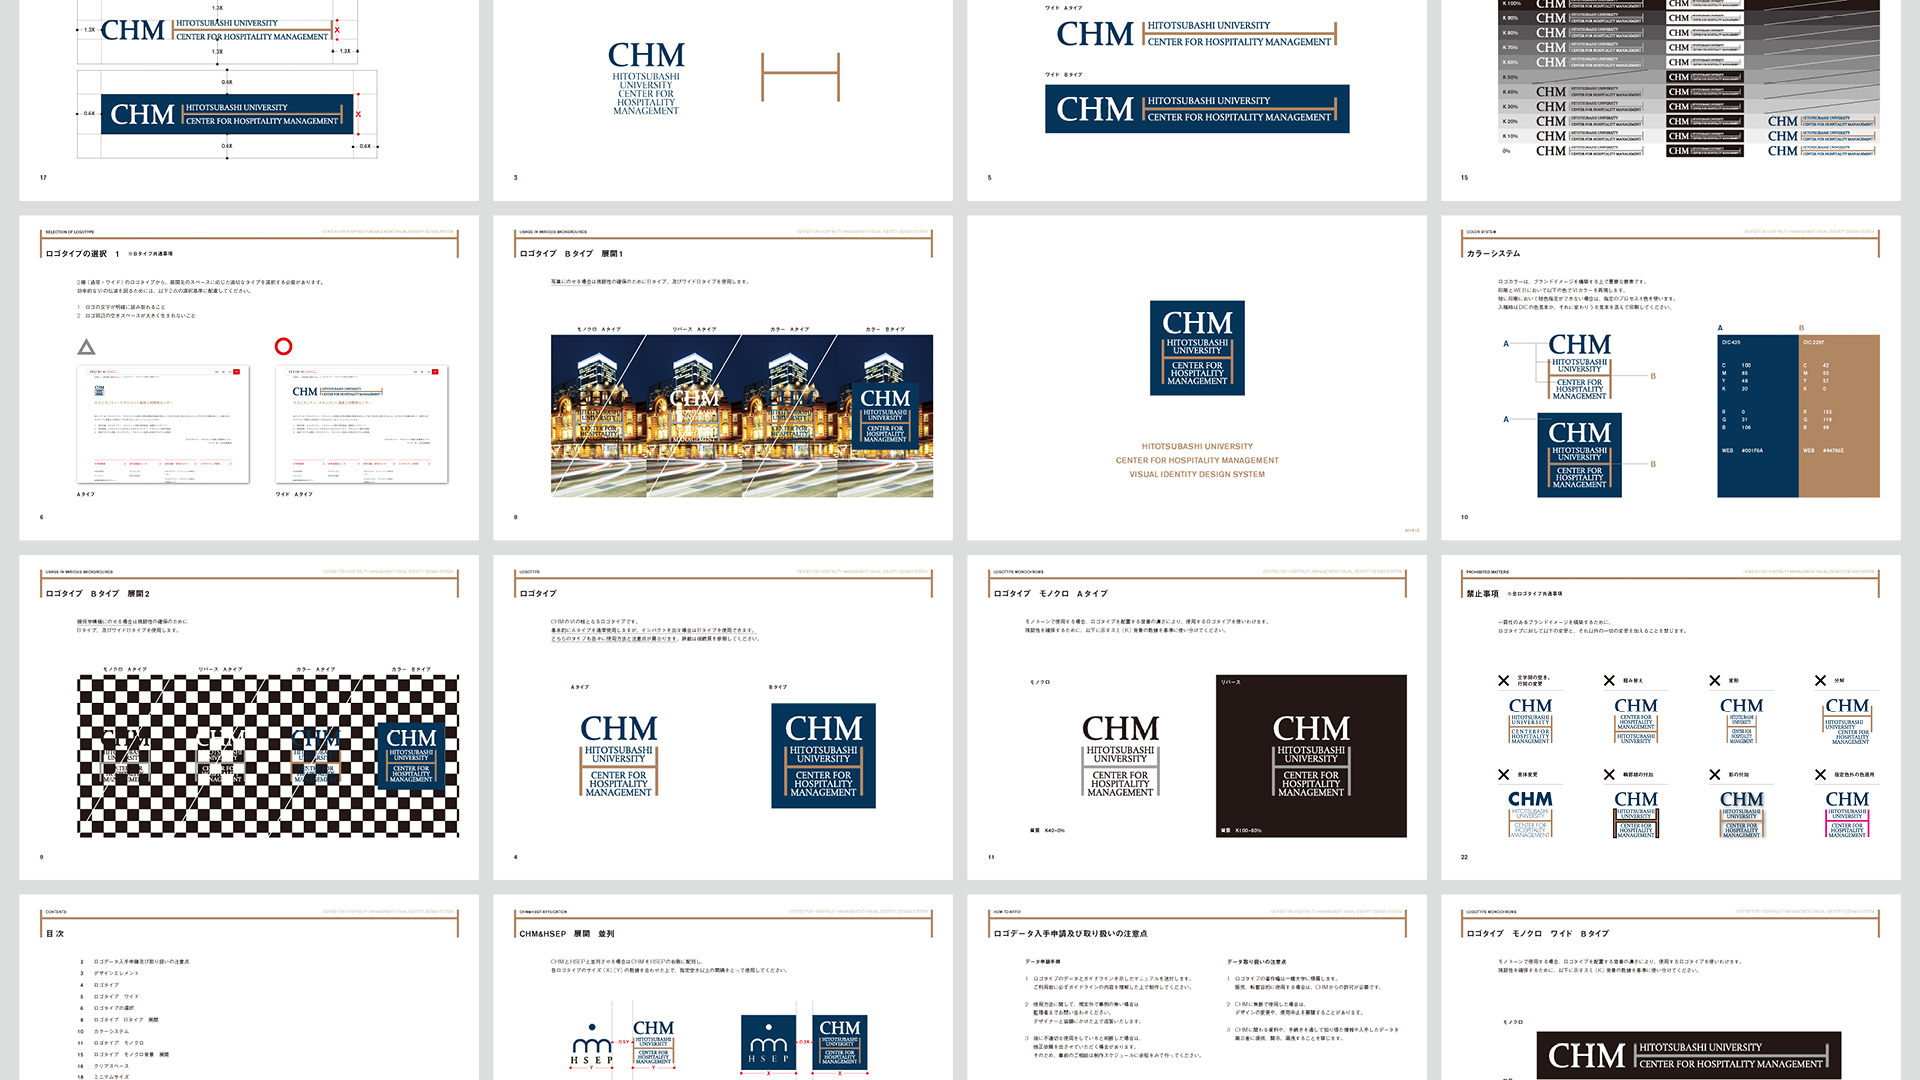 CHM's Visual Identity Guidelines